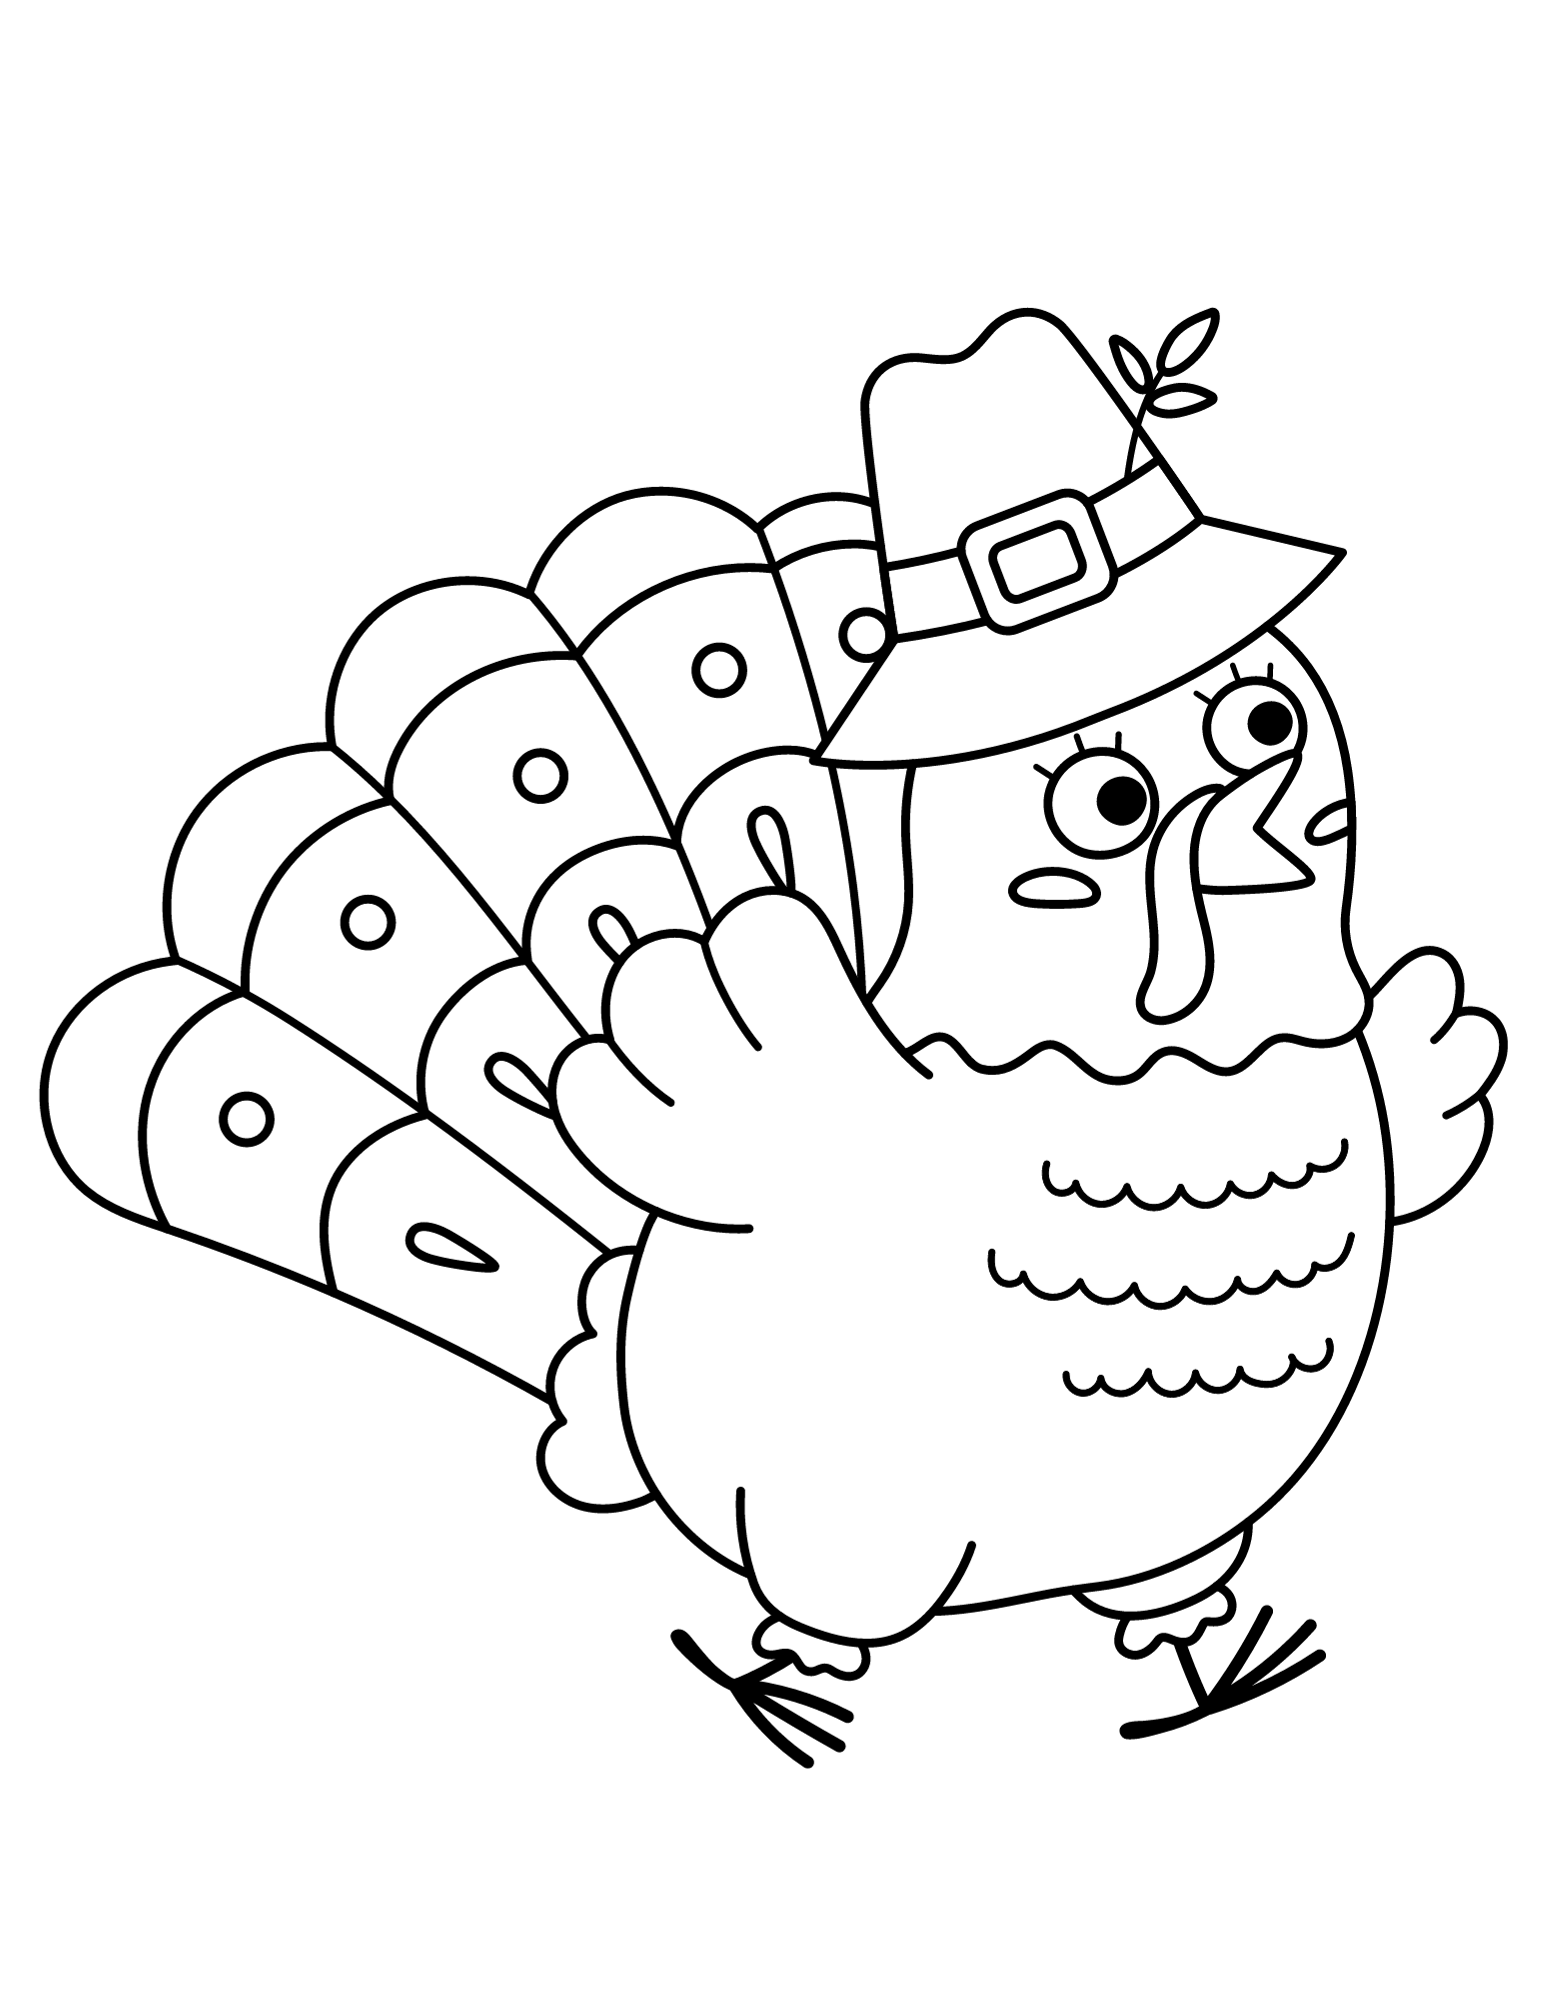 Cute pilgrim thanksgiving coloring pages for kids â